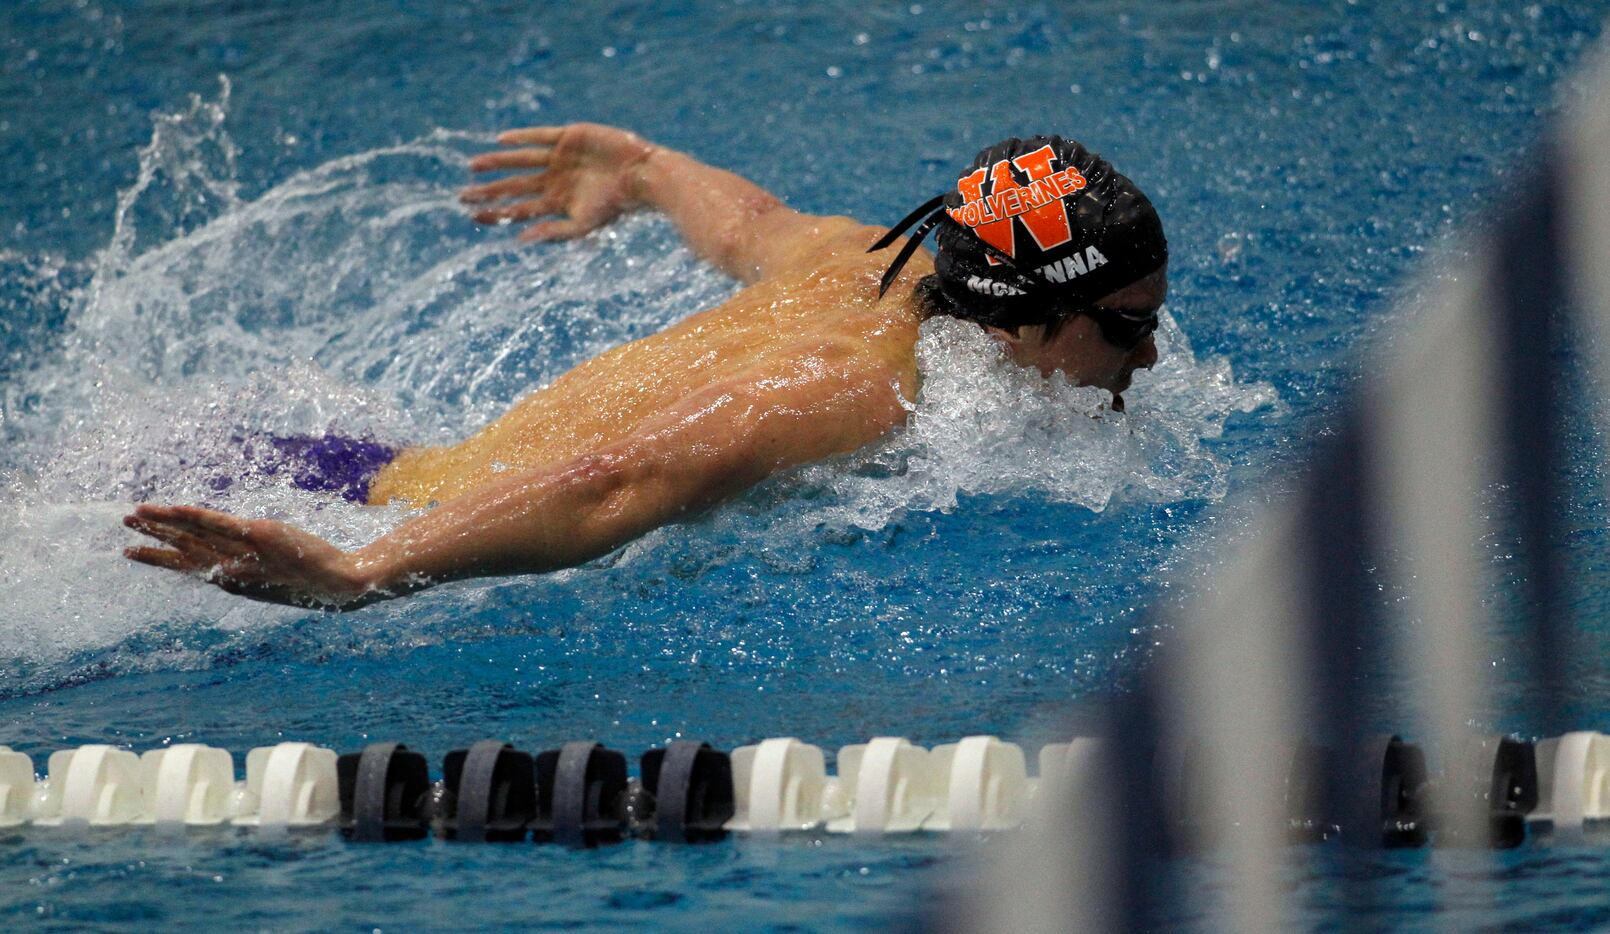 Freak Wakeland's Conor McKenna finishes strong to win the Boys 100 Yard Butterfly event with...